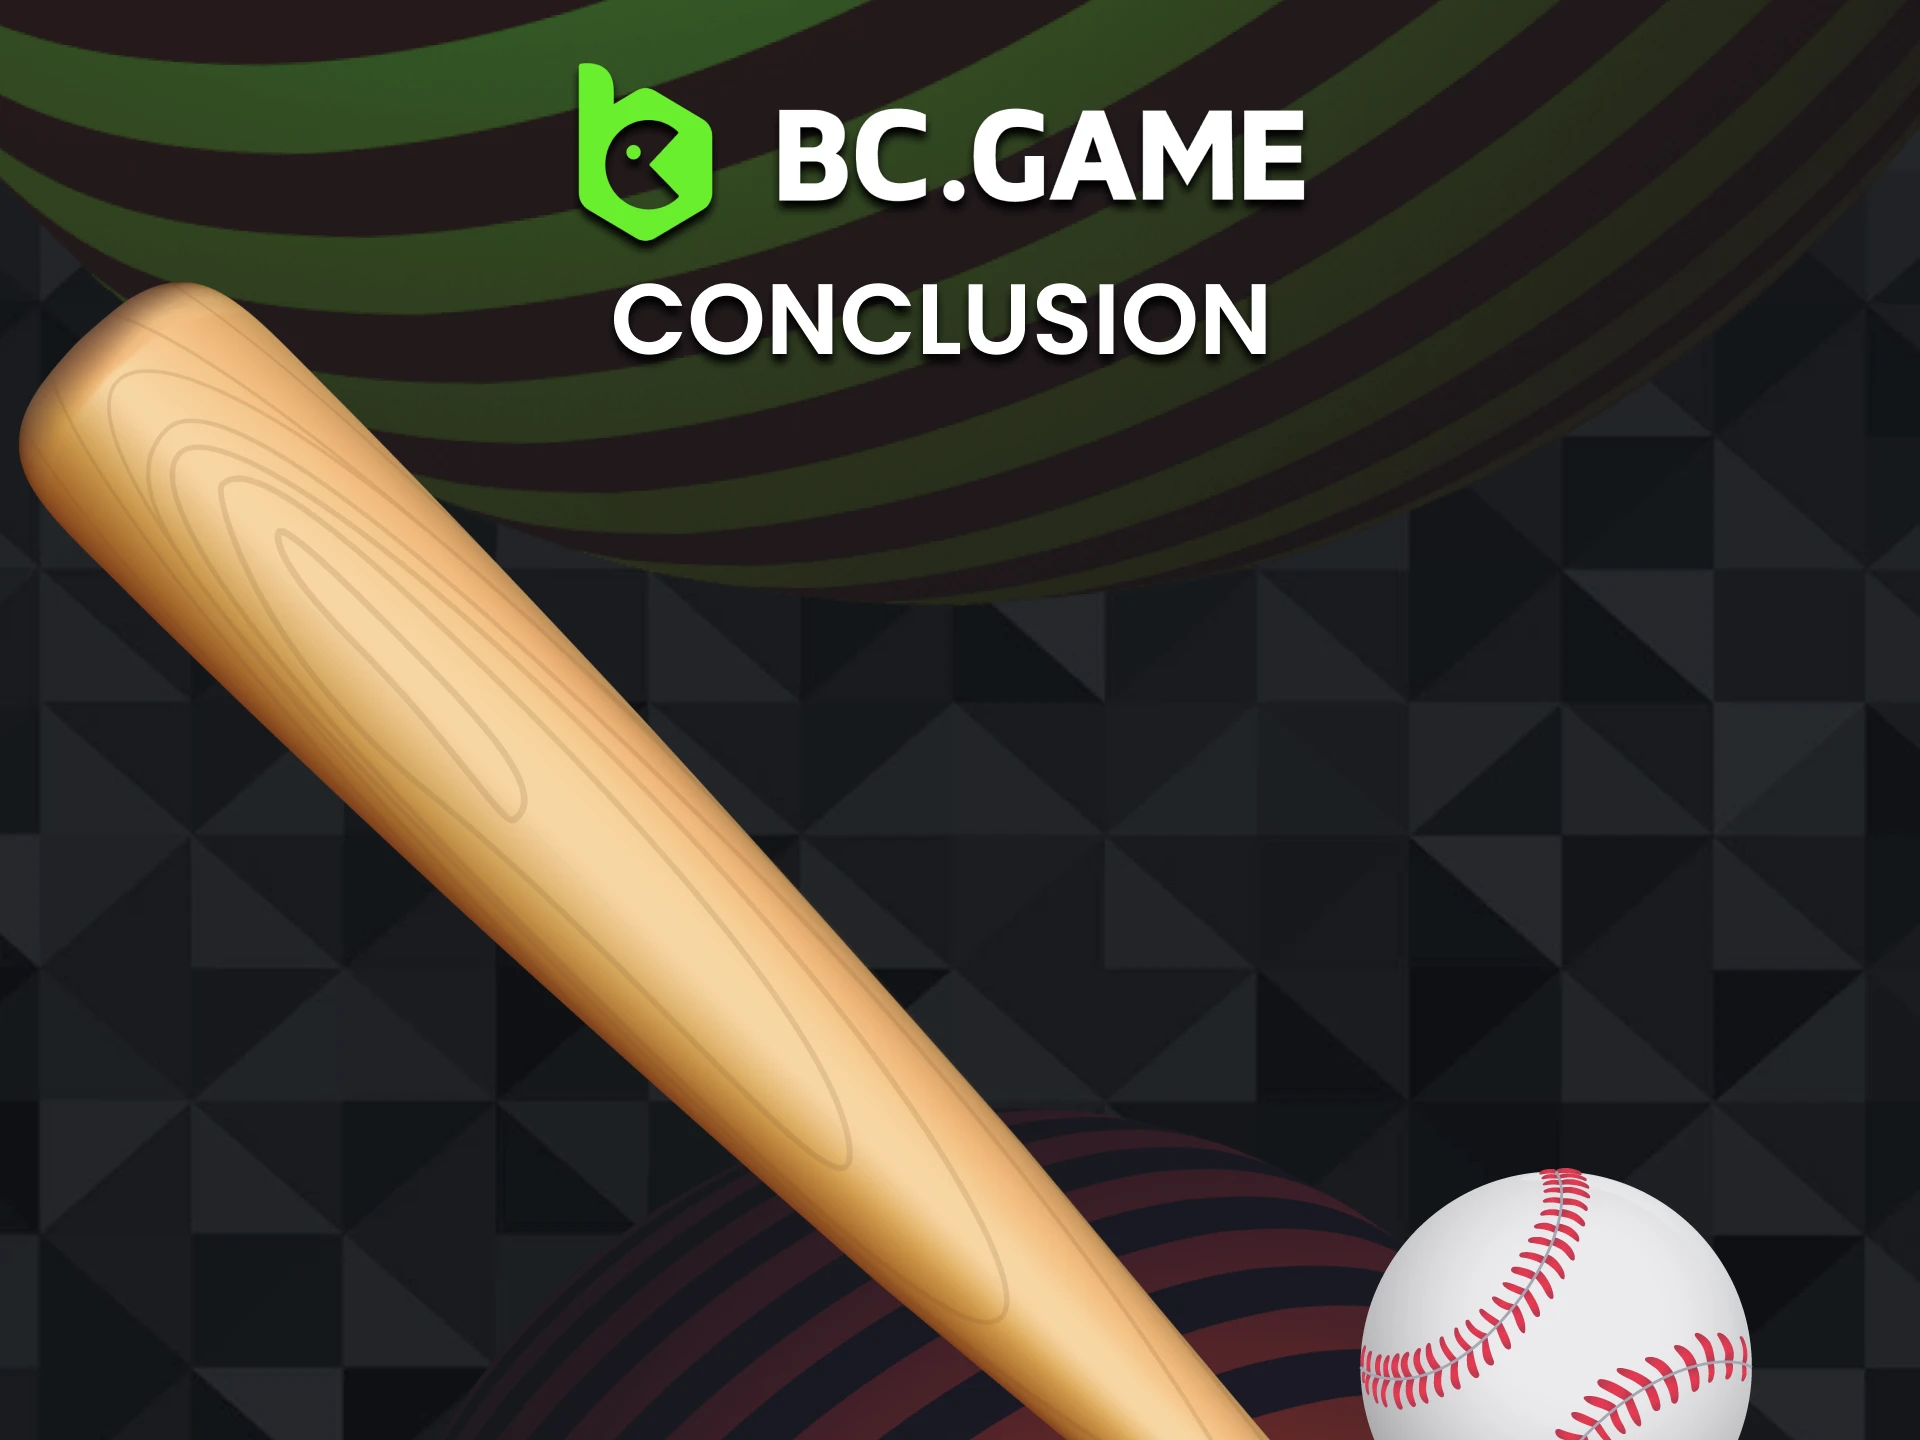 BC Game is ideal for baseball betting.